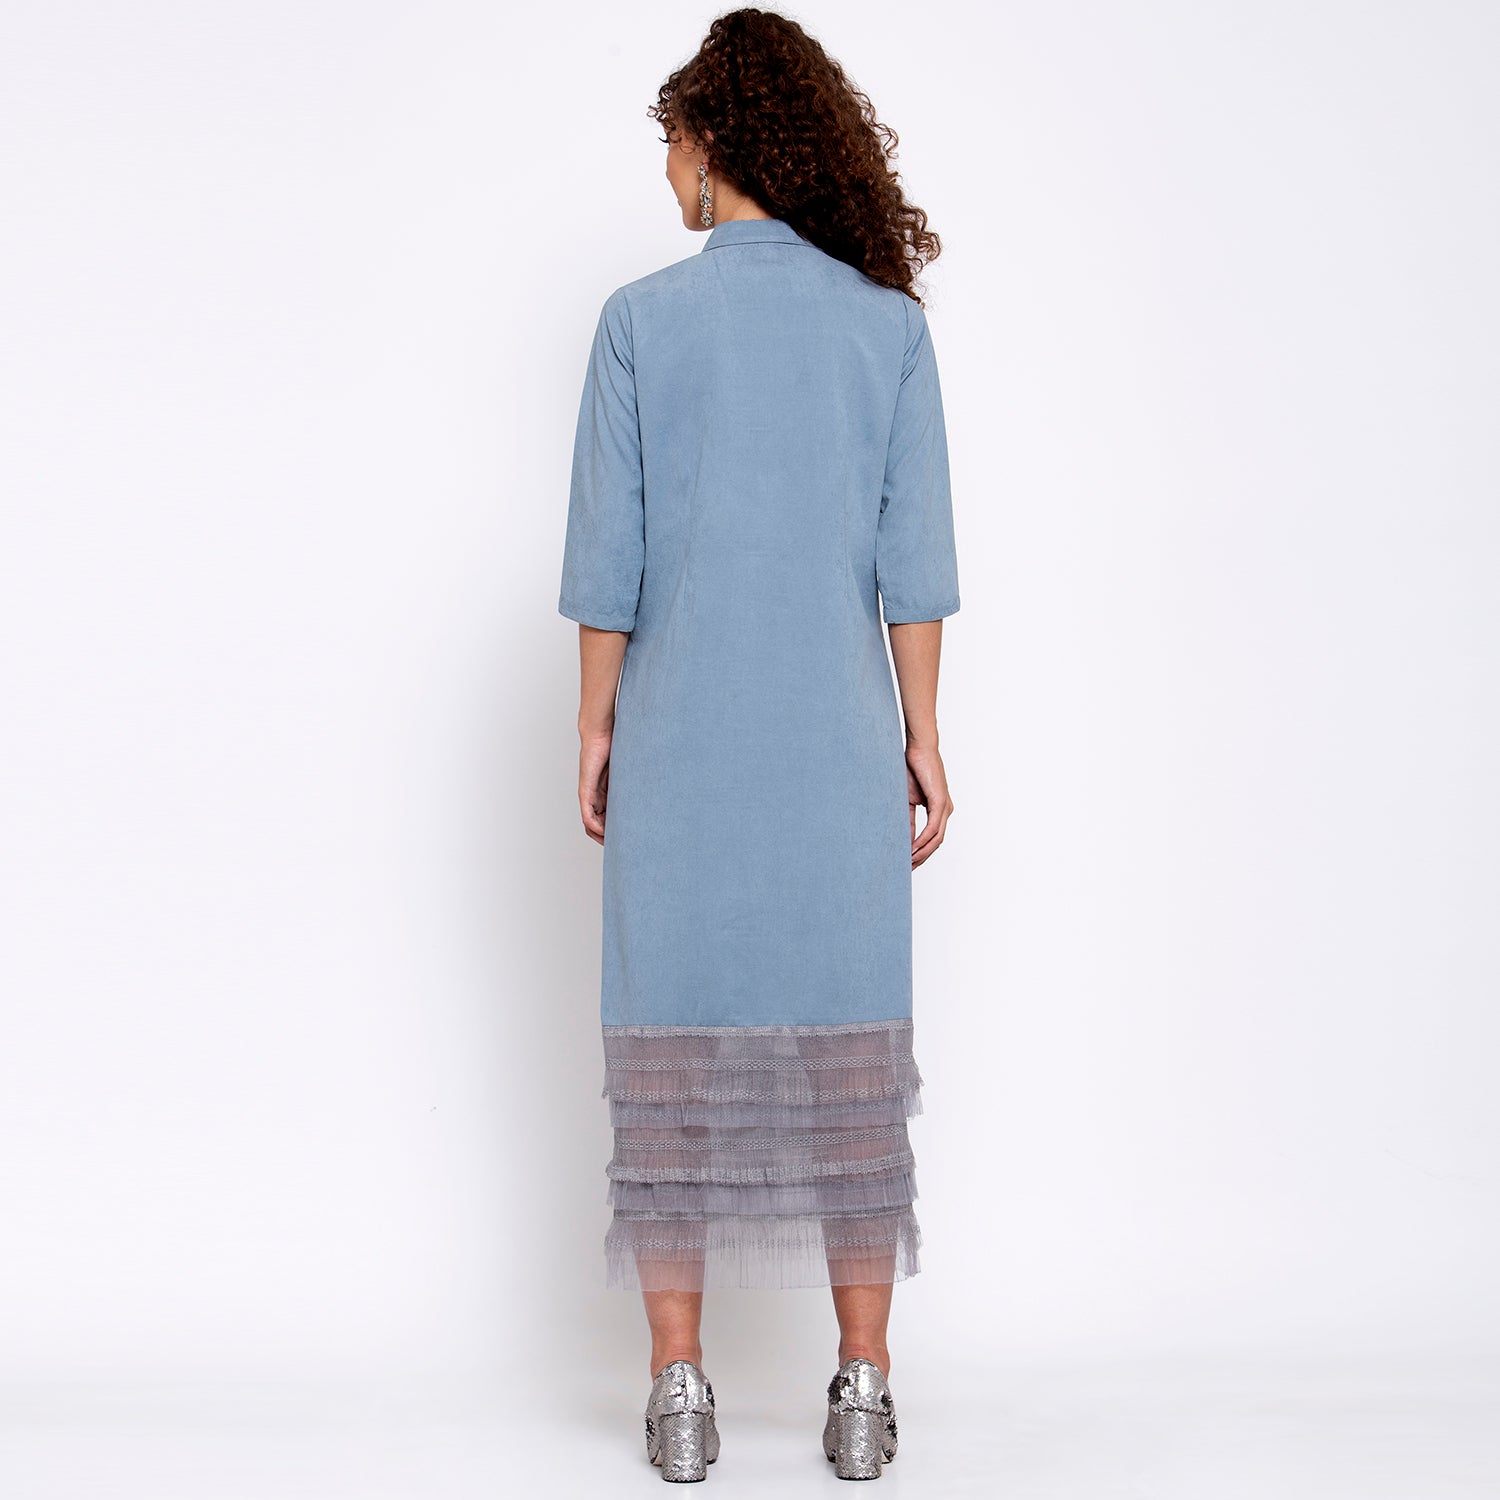 Blue Long Dress With Grey Frill At Bottom